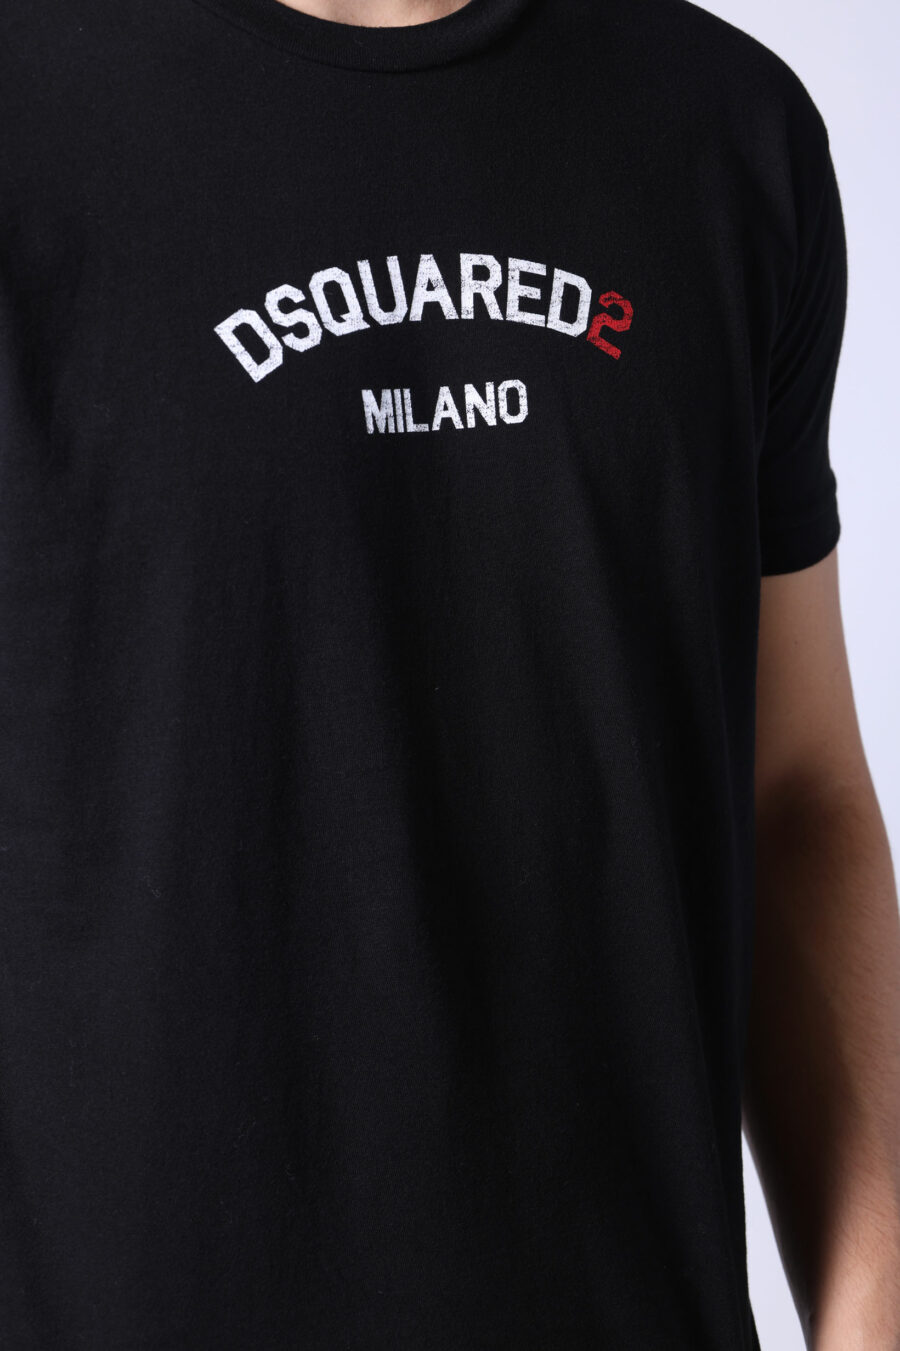 Black T-shirt with minilogue "dsquared2 milano" - Untitled Catalog 05473